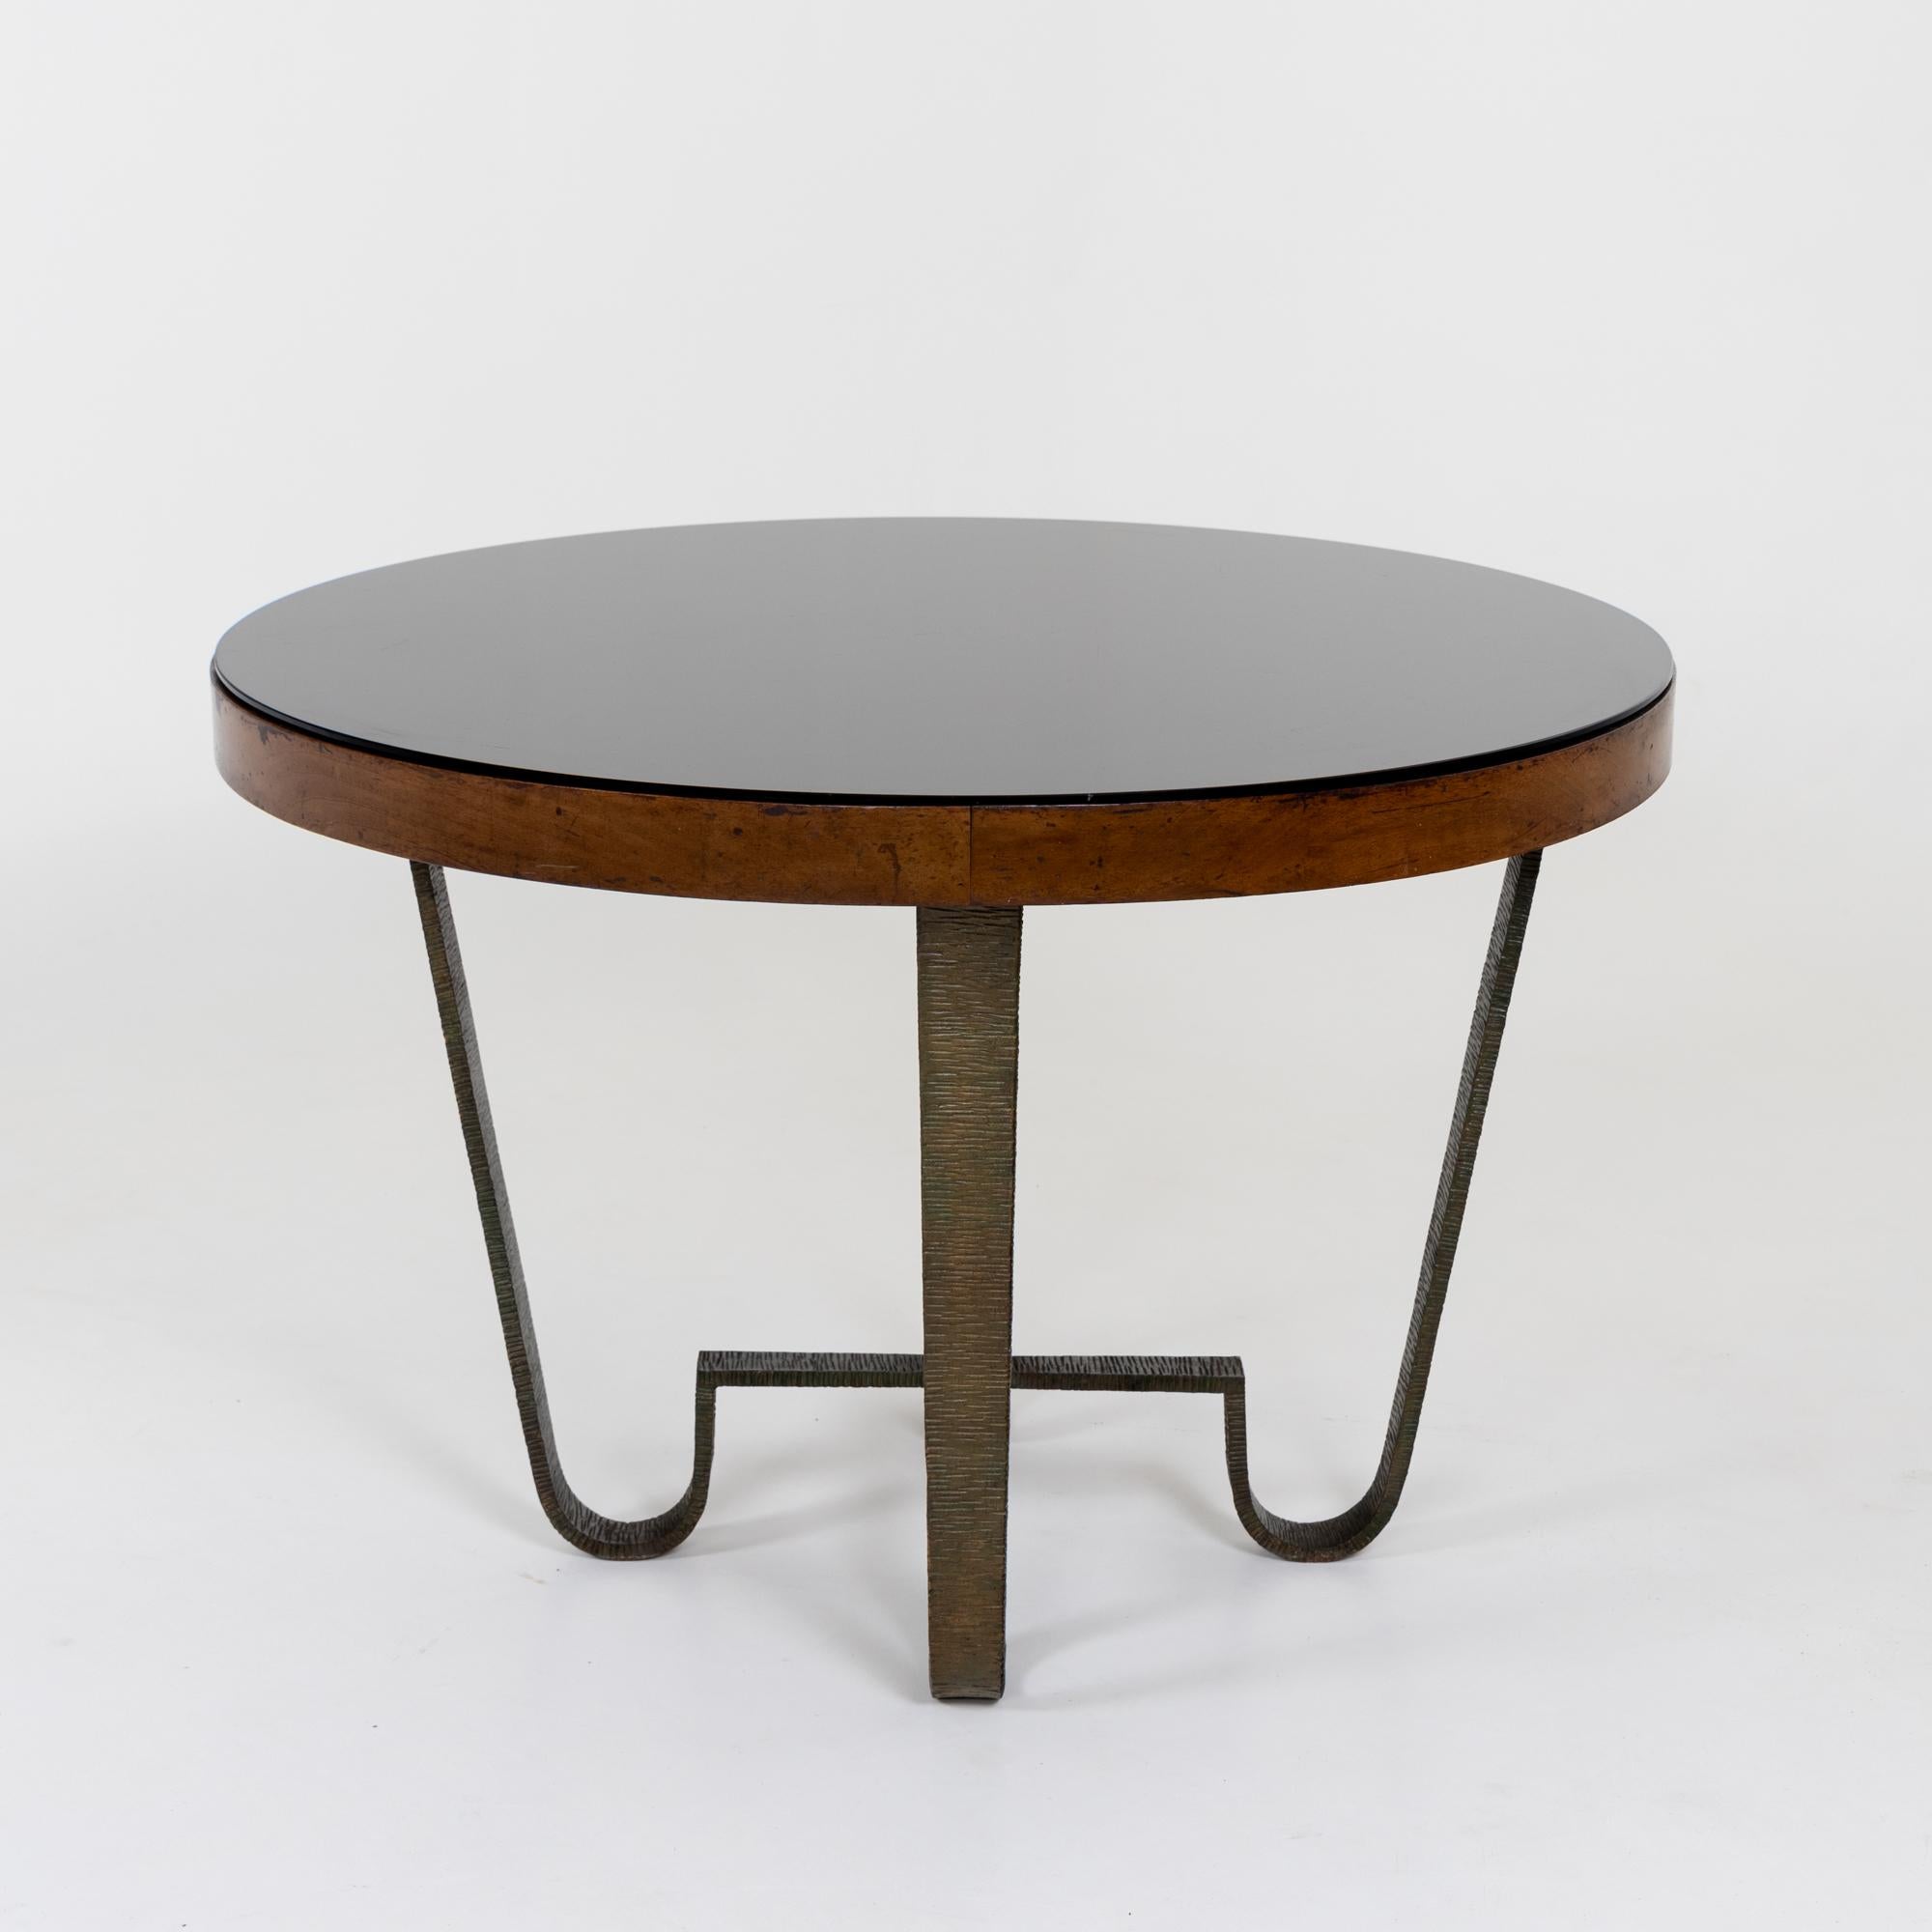 

An Italian Modernist dining table with glass top. 

Highly Textured bronze base of four legs intersecting at the base in a stretcher. The legs support a round wooden top with a black glass surface.
